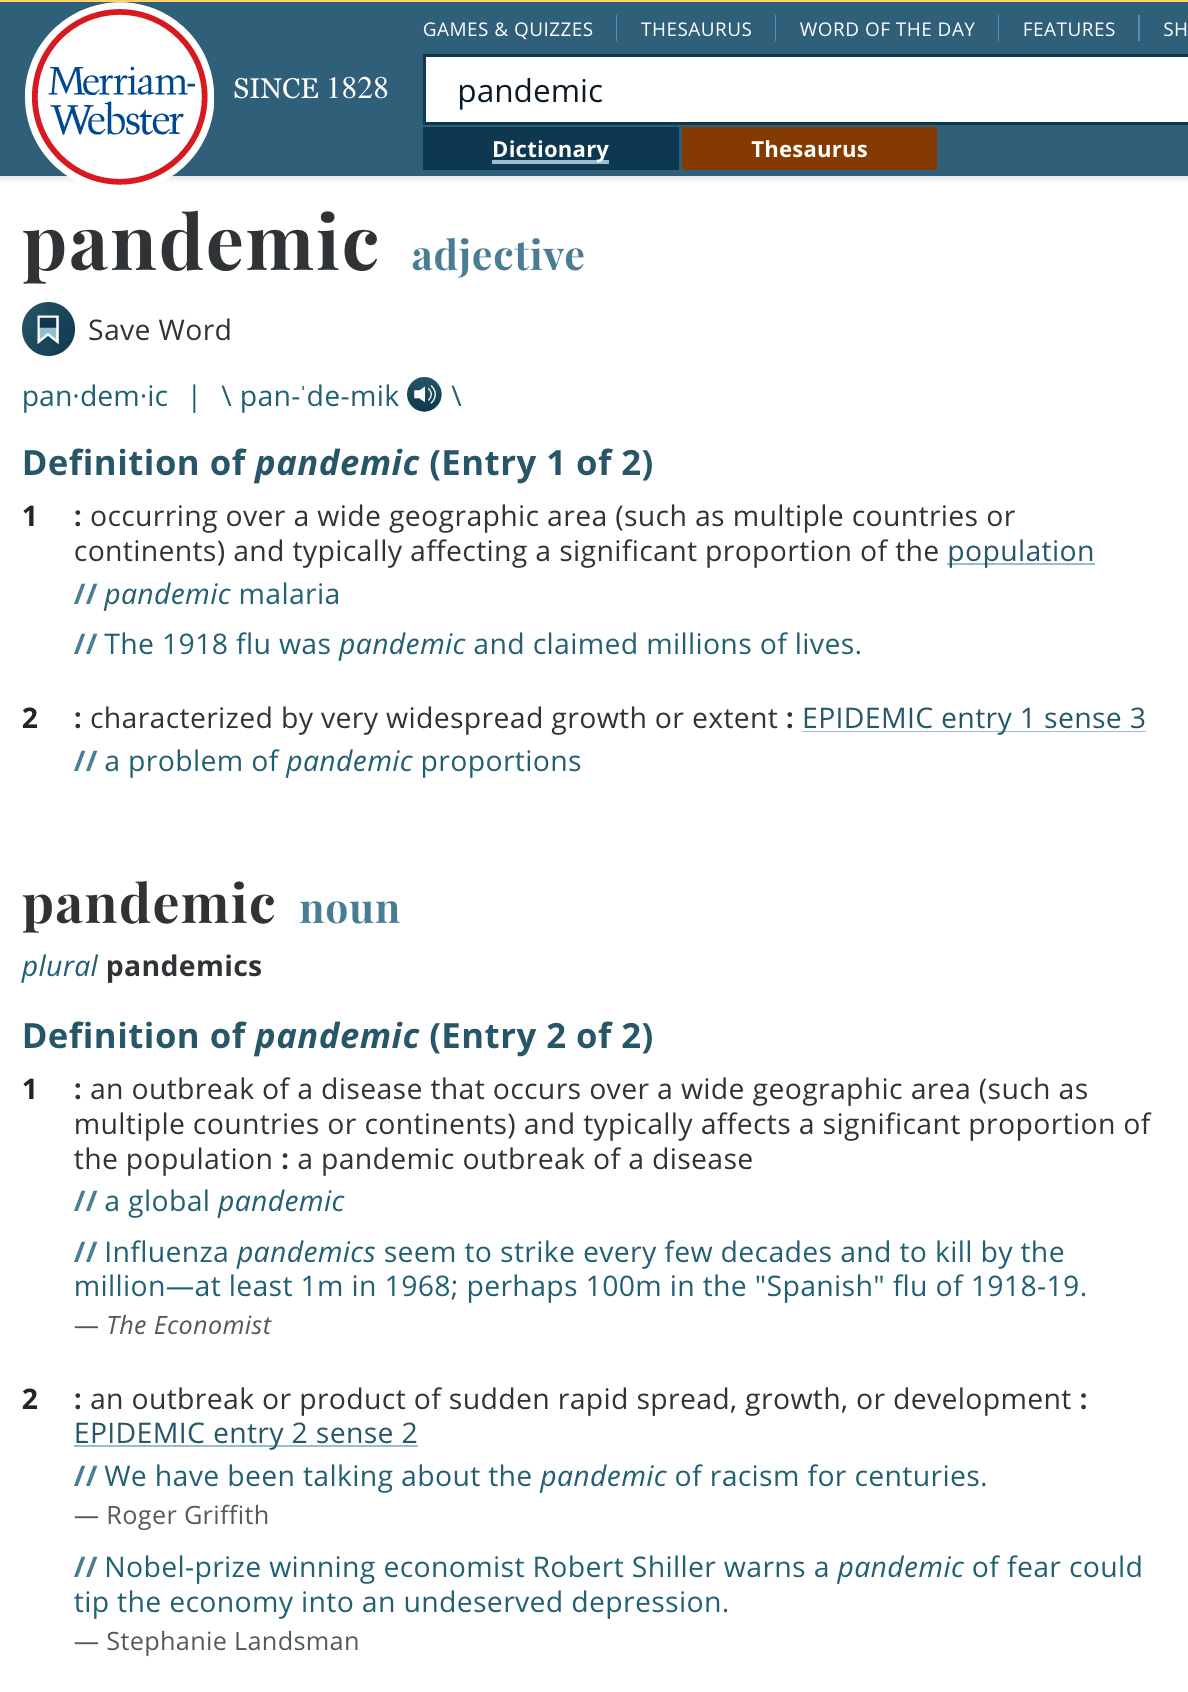 Merriam-Webster dictionary since 1828 entry for pandemic  pandemic  Definition of pandemic   (Entry 1 of 2)  1 : occurring over a wide geographic area (such as multiple countries or continents) and typically affecting a significant proportion of the population pandemic malaria The 1918 flu was pandemic and claimed millions of lives.  2 : characterized by very widespread growth or extent : epidemic entry 1 sense 3 a problem of pandemic proportions  pandemic  noun   plural pandemics  Definition of pandemic (Entry 2 of 2)  1 : an outbreak of a disease that occurs over a wide geographic area (such as multiple countries or continents) and typically affects a significant proportion of the population : a pandemic outbreak of a disease a global pandemic Influenza pandemics seem to strike every few decades and to kill by the million—at least 1m in 1968; perhaps 100m in the "Spanish" flu of 1918-19. — The Economist  2 : an outbreak or product of sudden rapid spread, growth, or development : epidemic entry 2 sense 2 We have been talking about the pandemic of racism for centuries.— Roger Griffith Nobel-prize winning economist Robert Shiller warns a pandemic of fear could tip the economy into an undeserved depression.— Stephanie Landsman